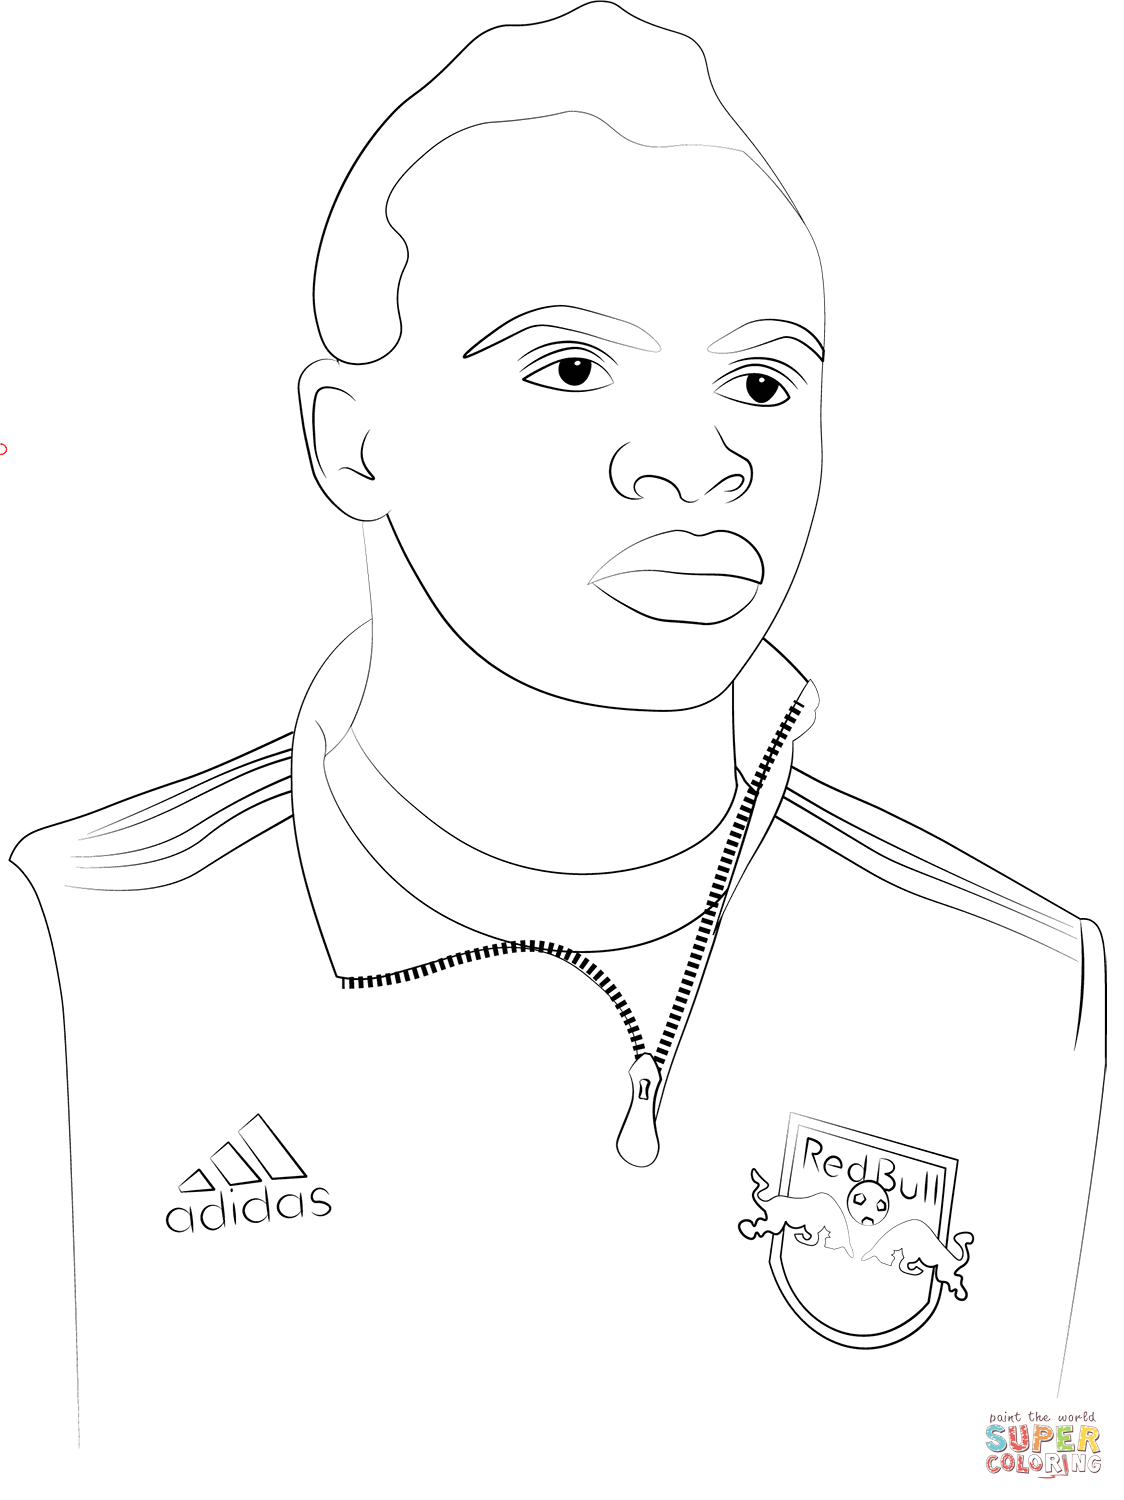 Sadio Mané coloring page | Free Printable Coloring Pages